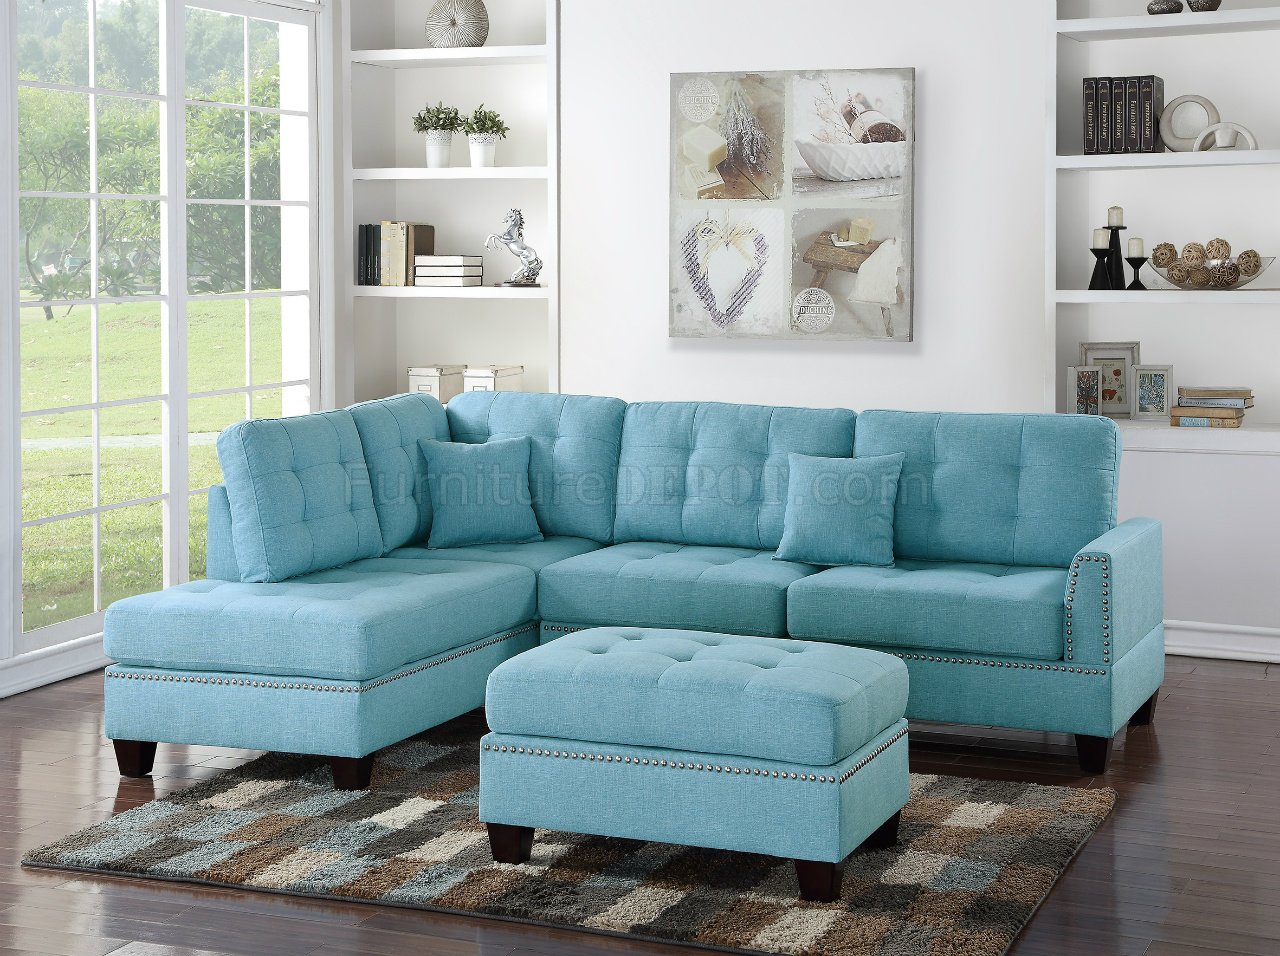 F6505 Sectional Sofa in Light Blue Fabric by Boss w/ Ottoman - Click Image to Close